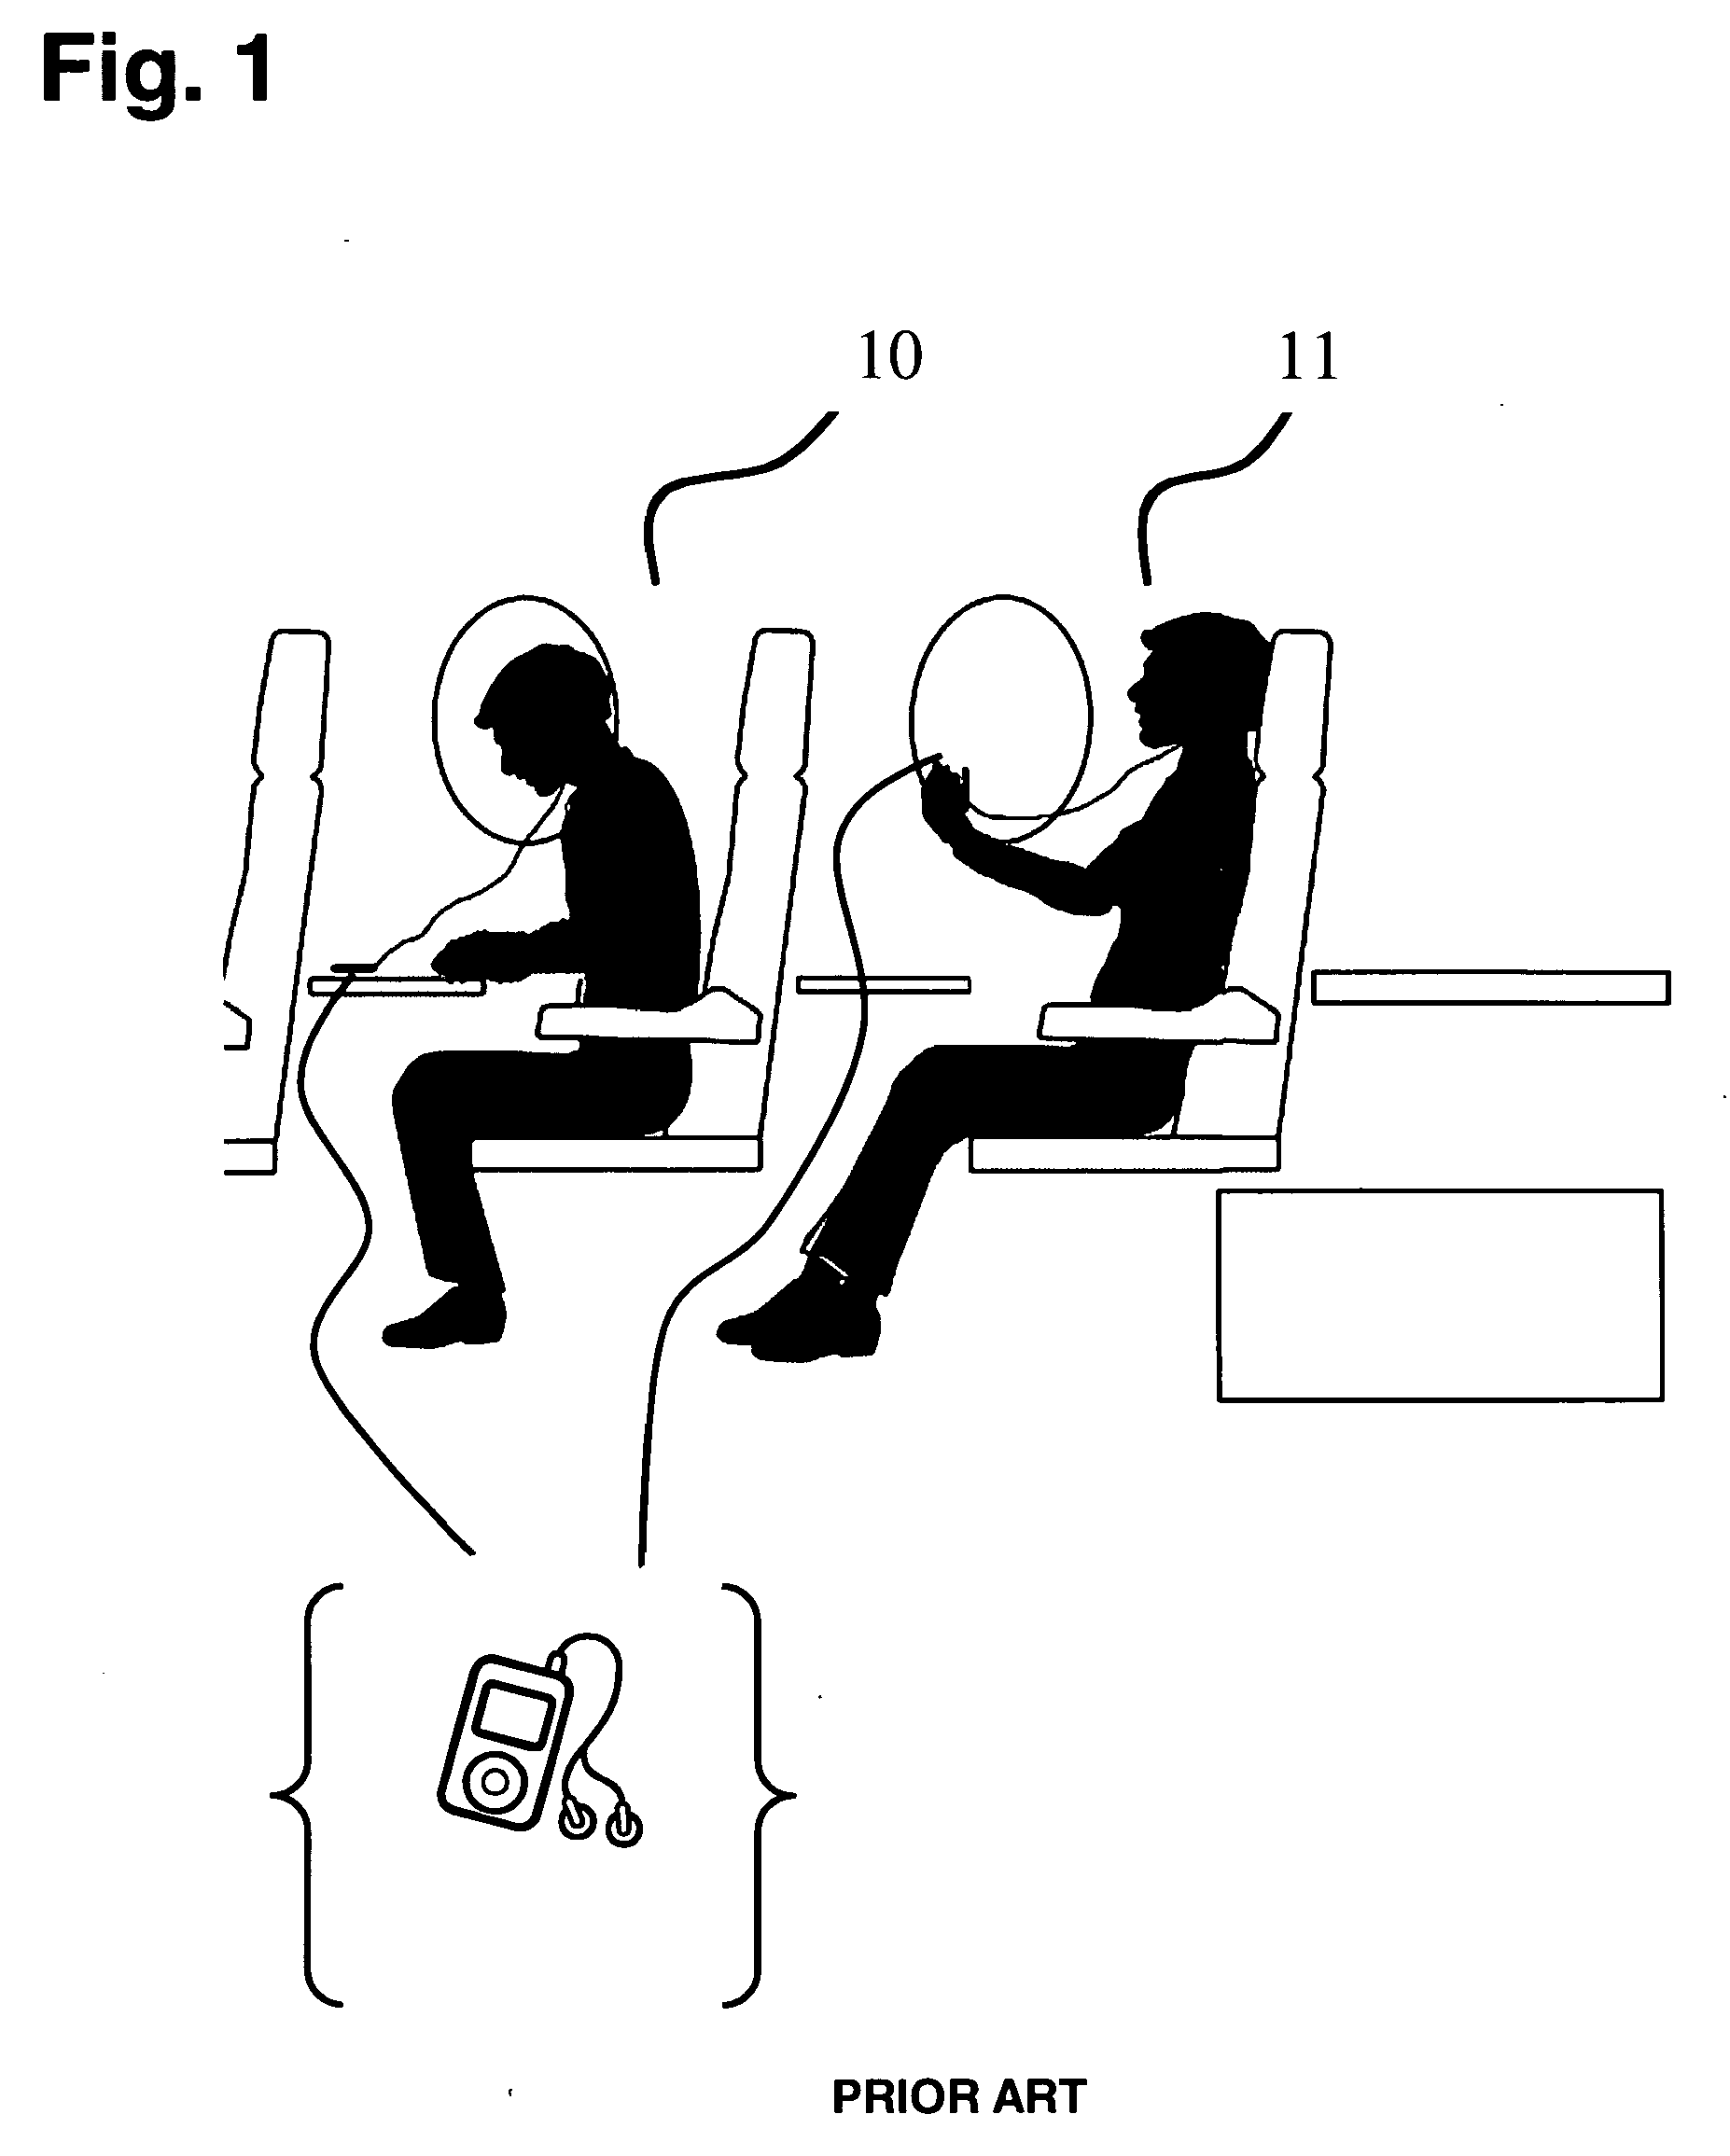 Hands-free device holder for securing hand-held portable electronic device with a screen